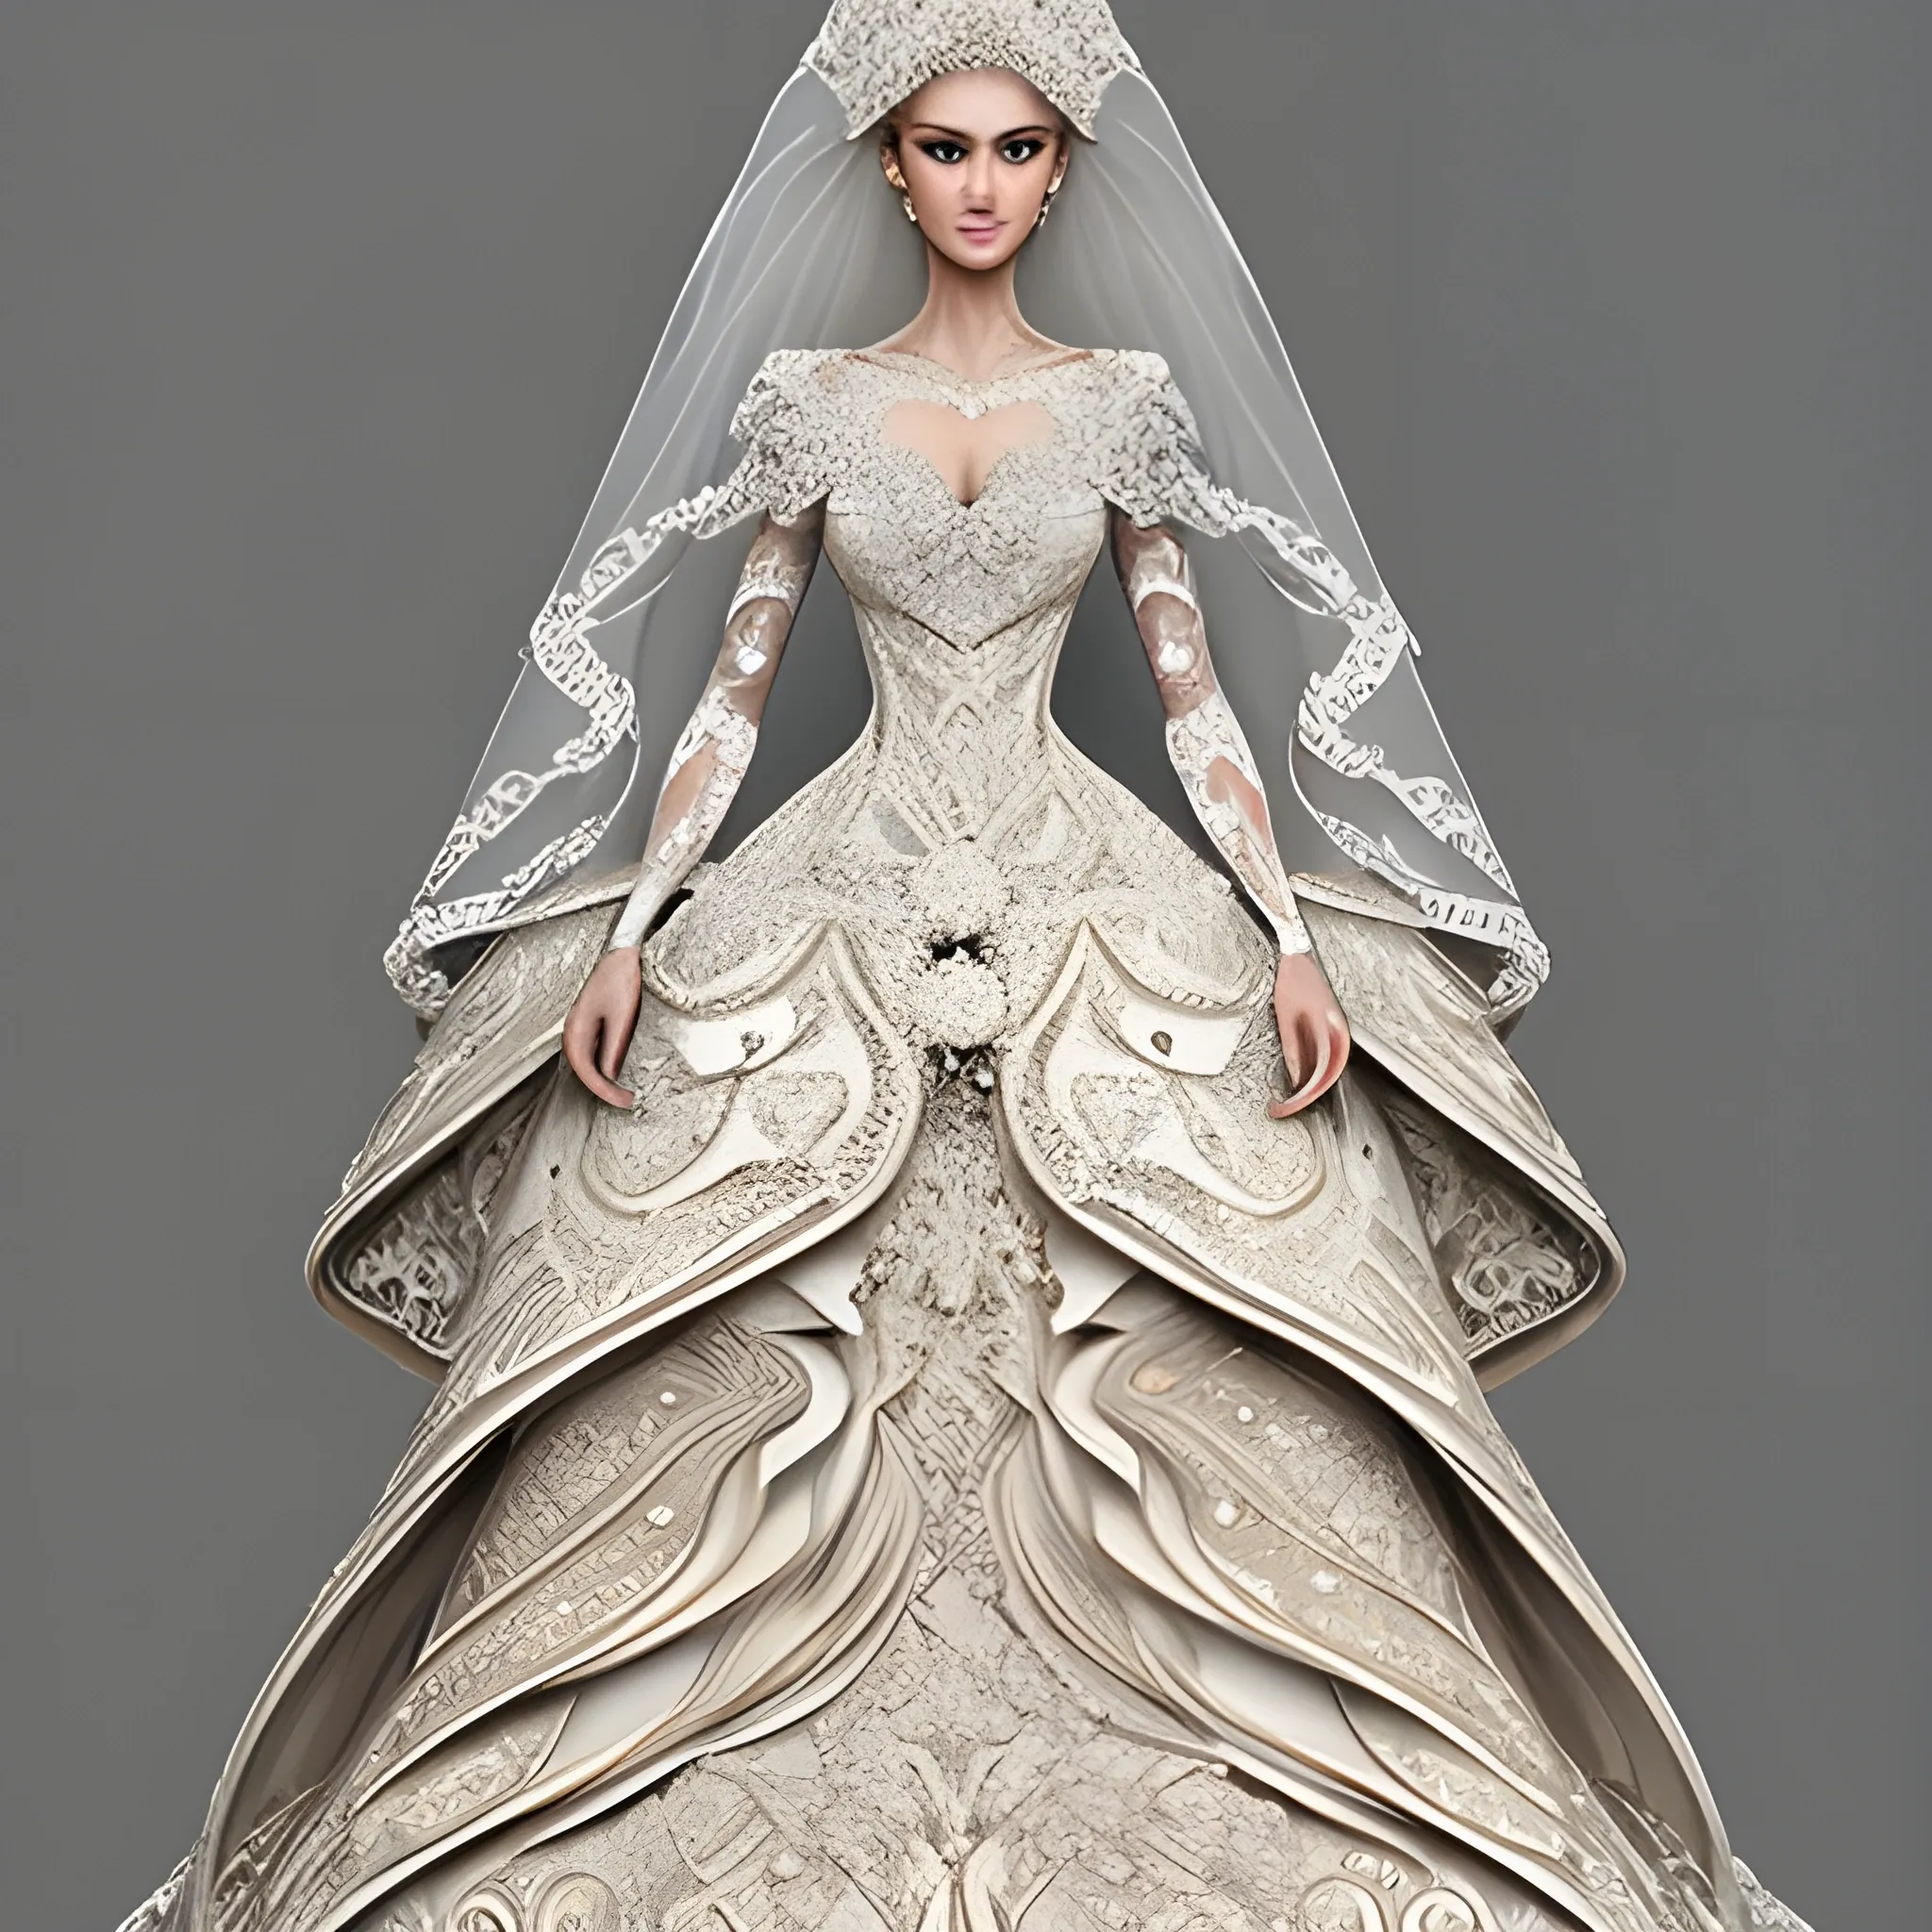 A woman wearing a magnificent incredibly intricate wedding dres ...